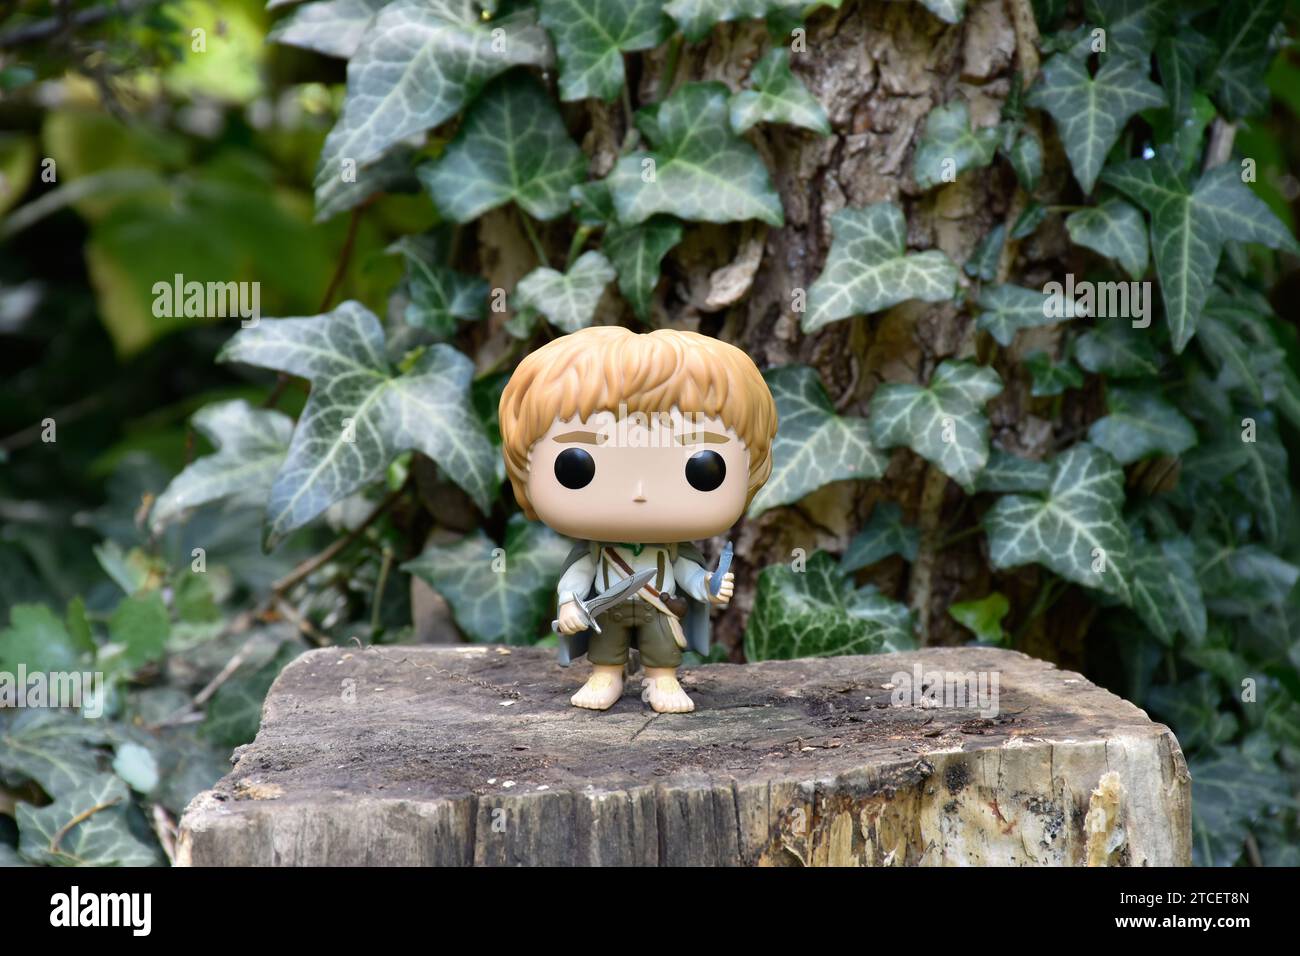 Funko Pop action figure of hobbit Sam with sword and phial's light from fantasy movie The Lord of the Rings. Forest, green ivy leaves, magic woodland. Stock Photo